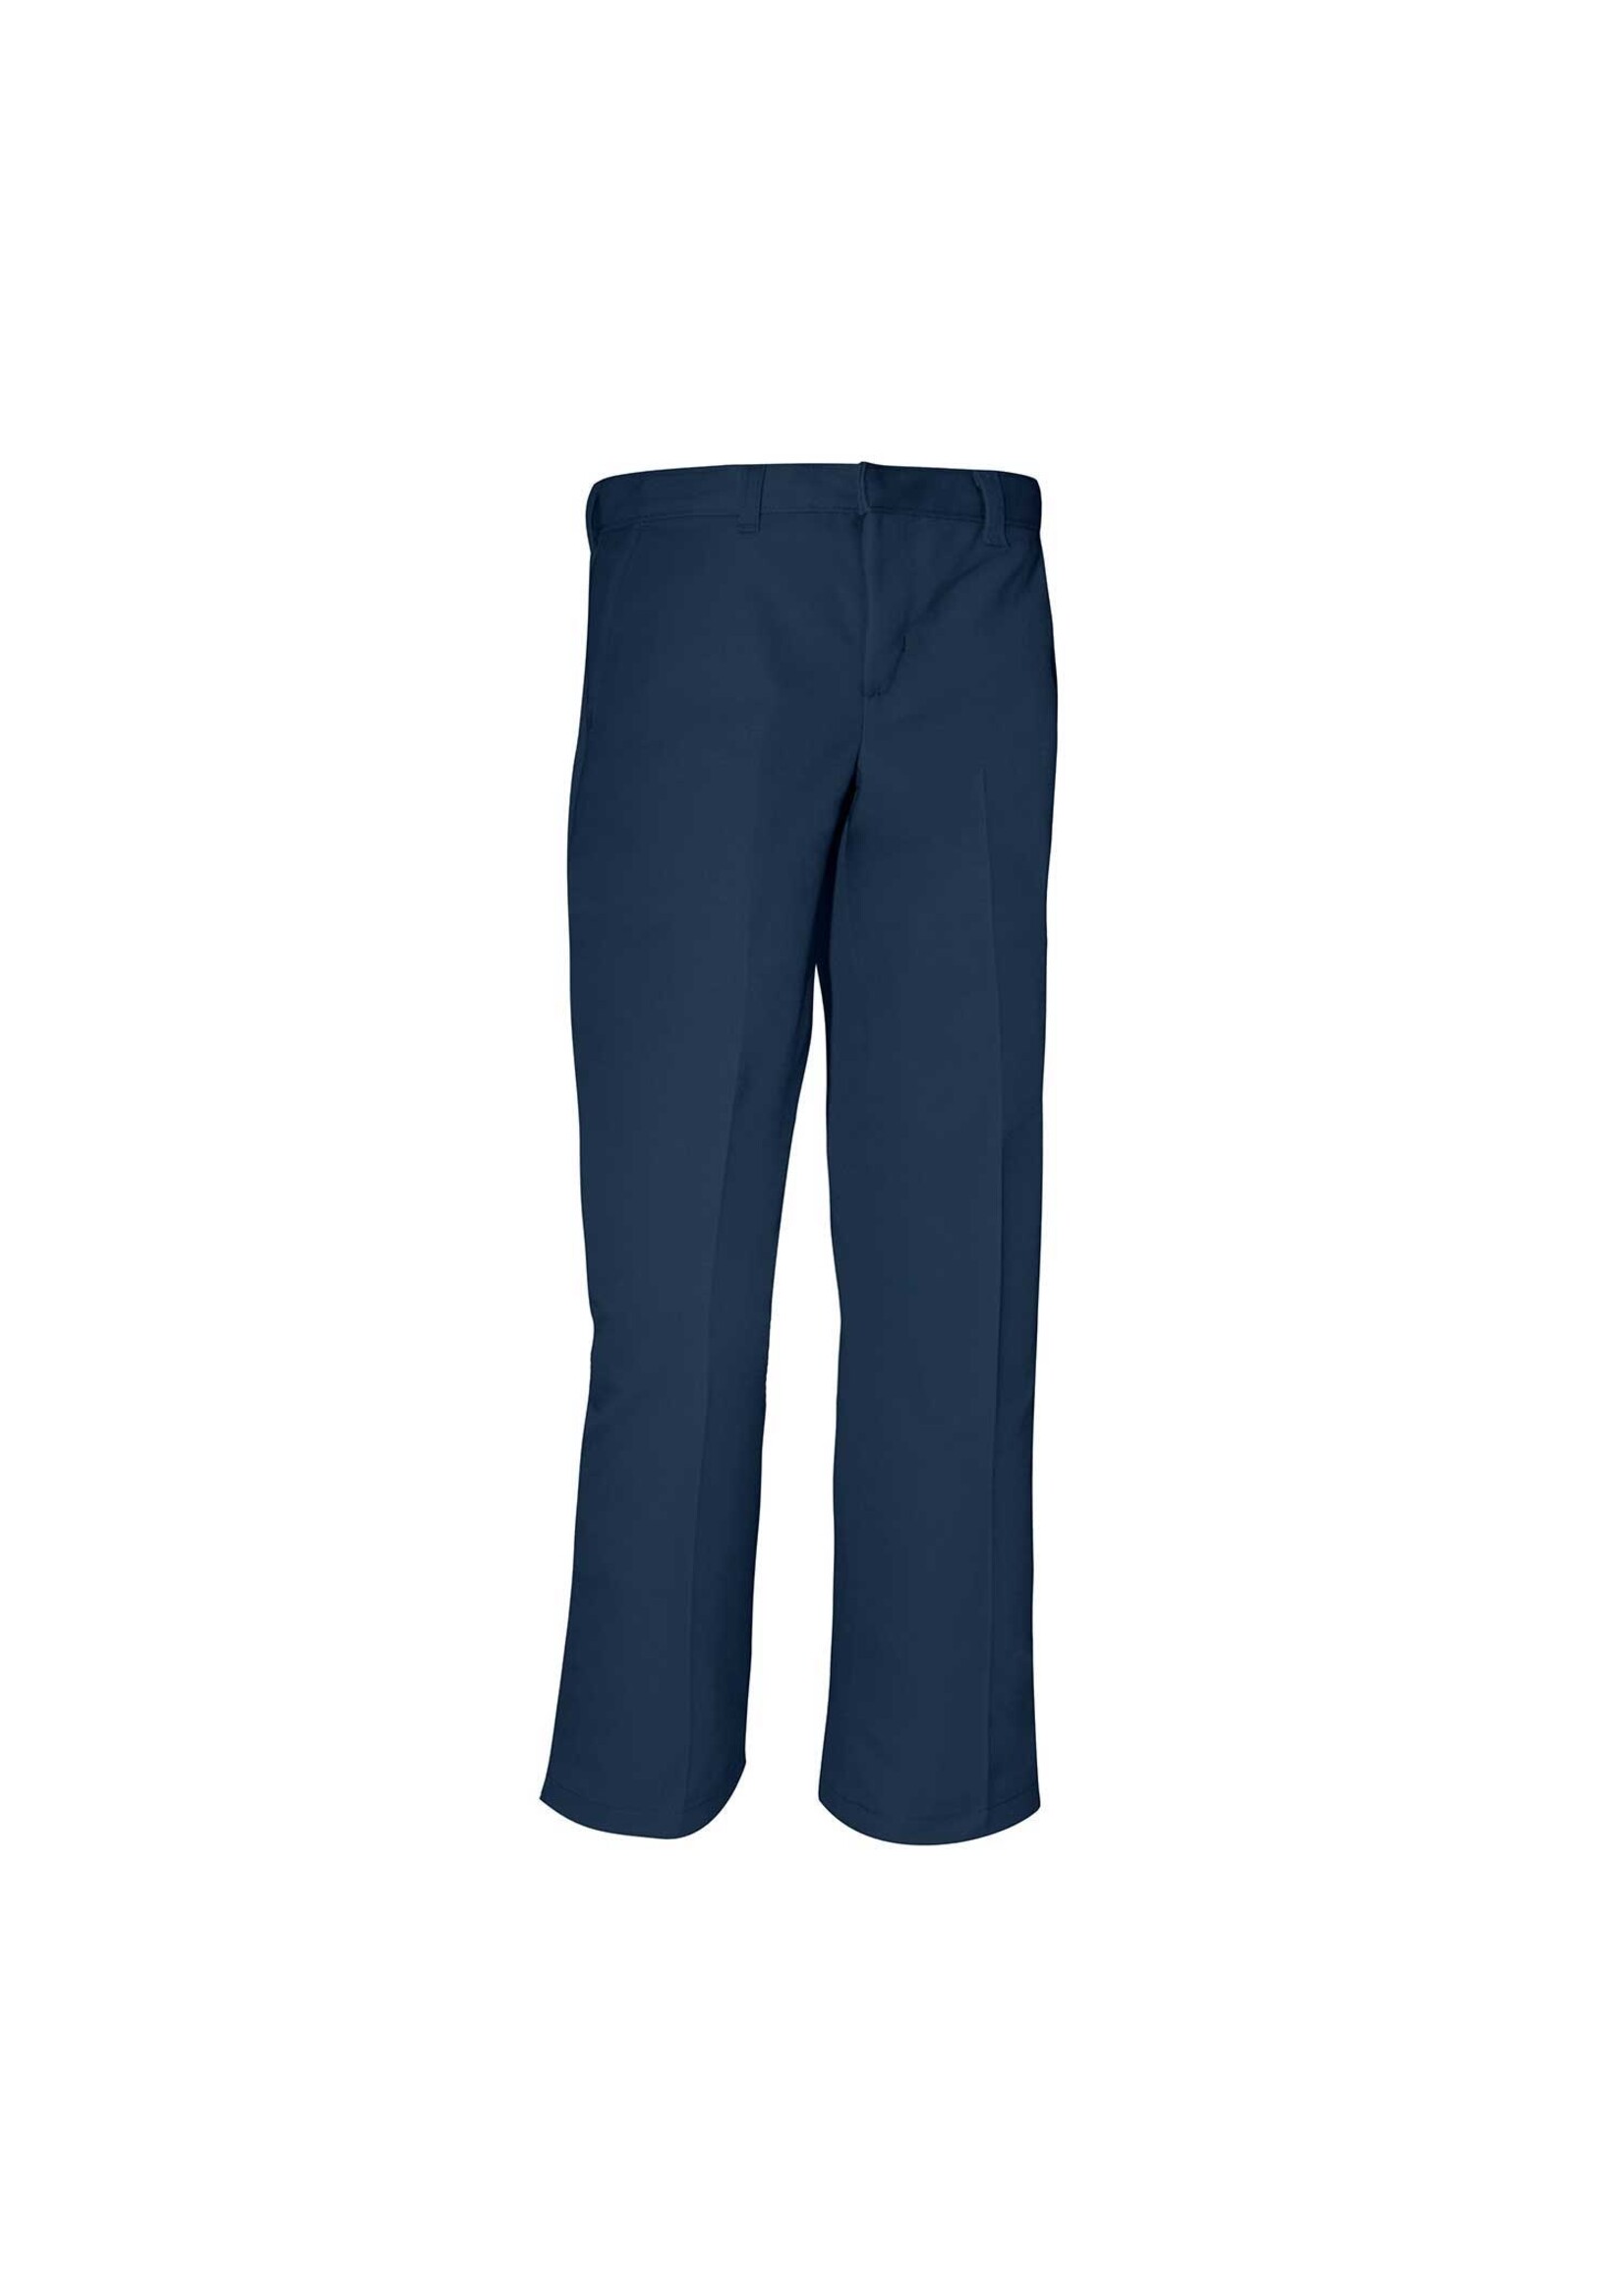 Boys Flat Front Pants (KN) with logo